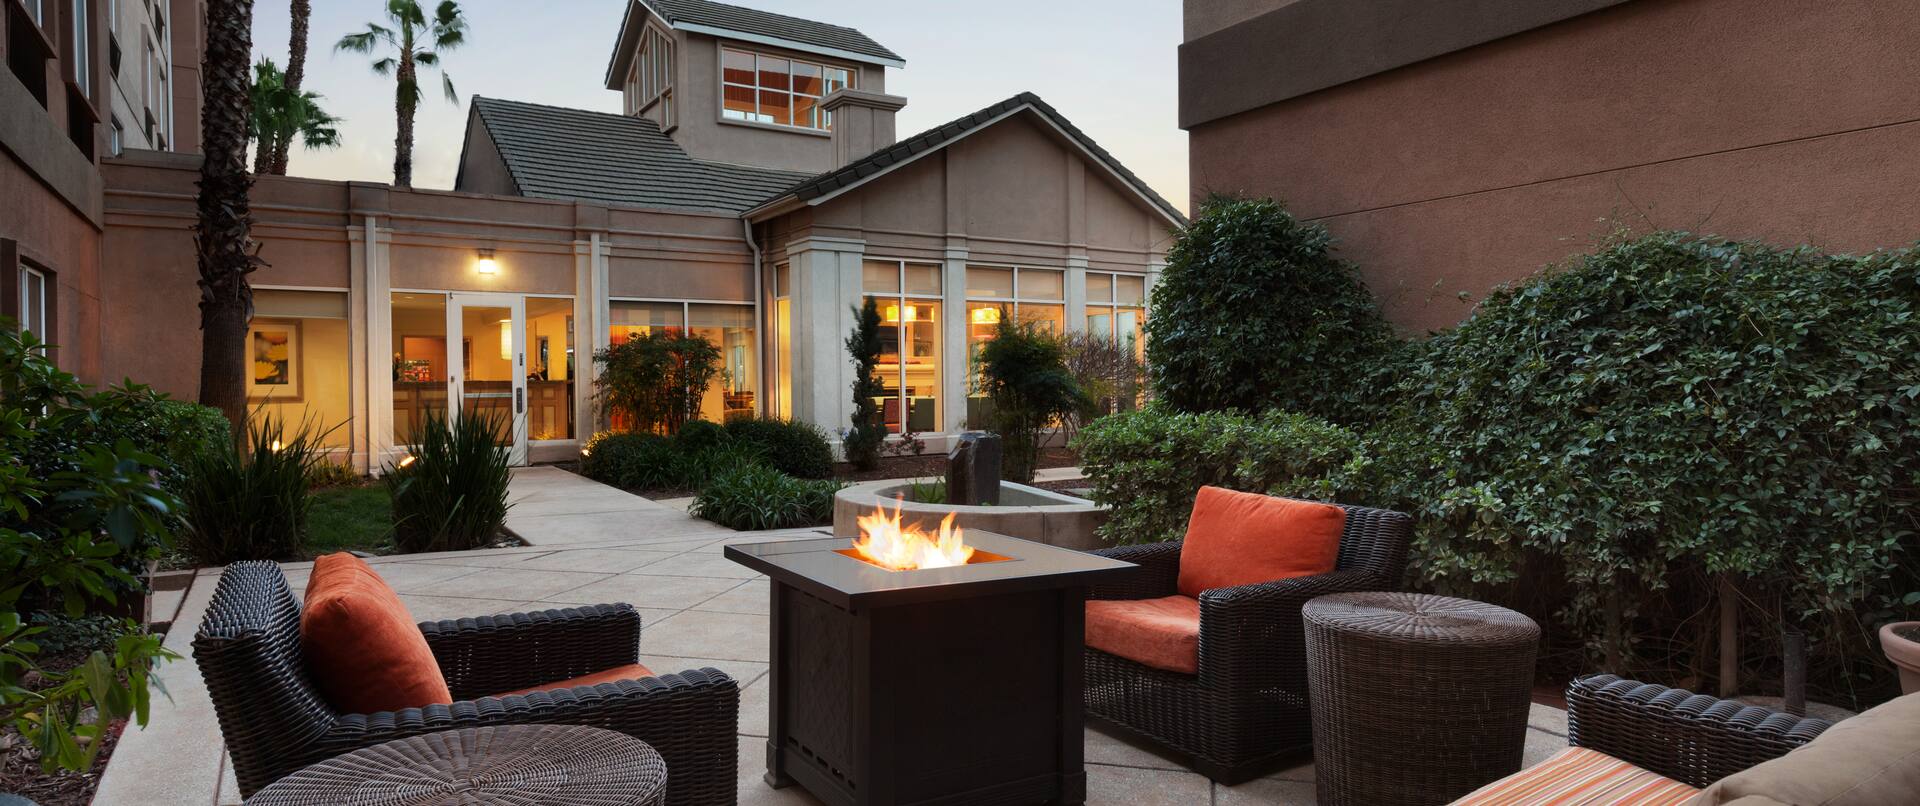 Seating Around Fire Pit on Outdoor Patio at Dusk